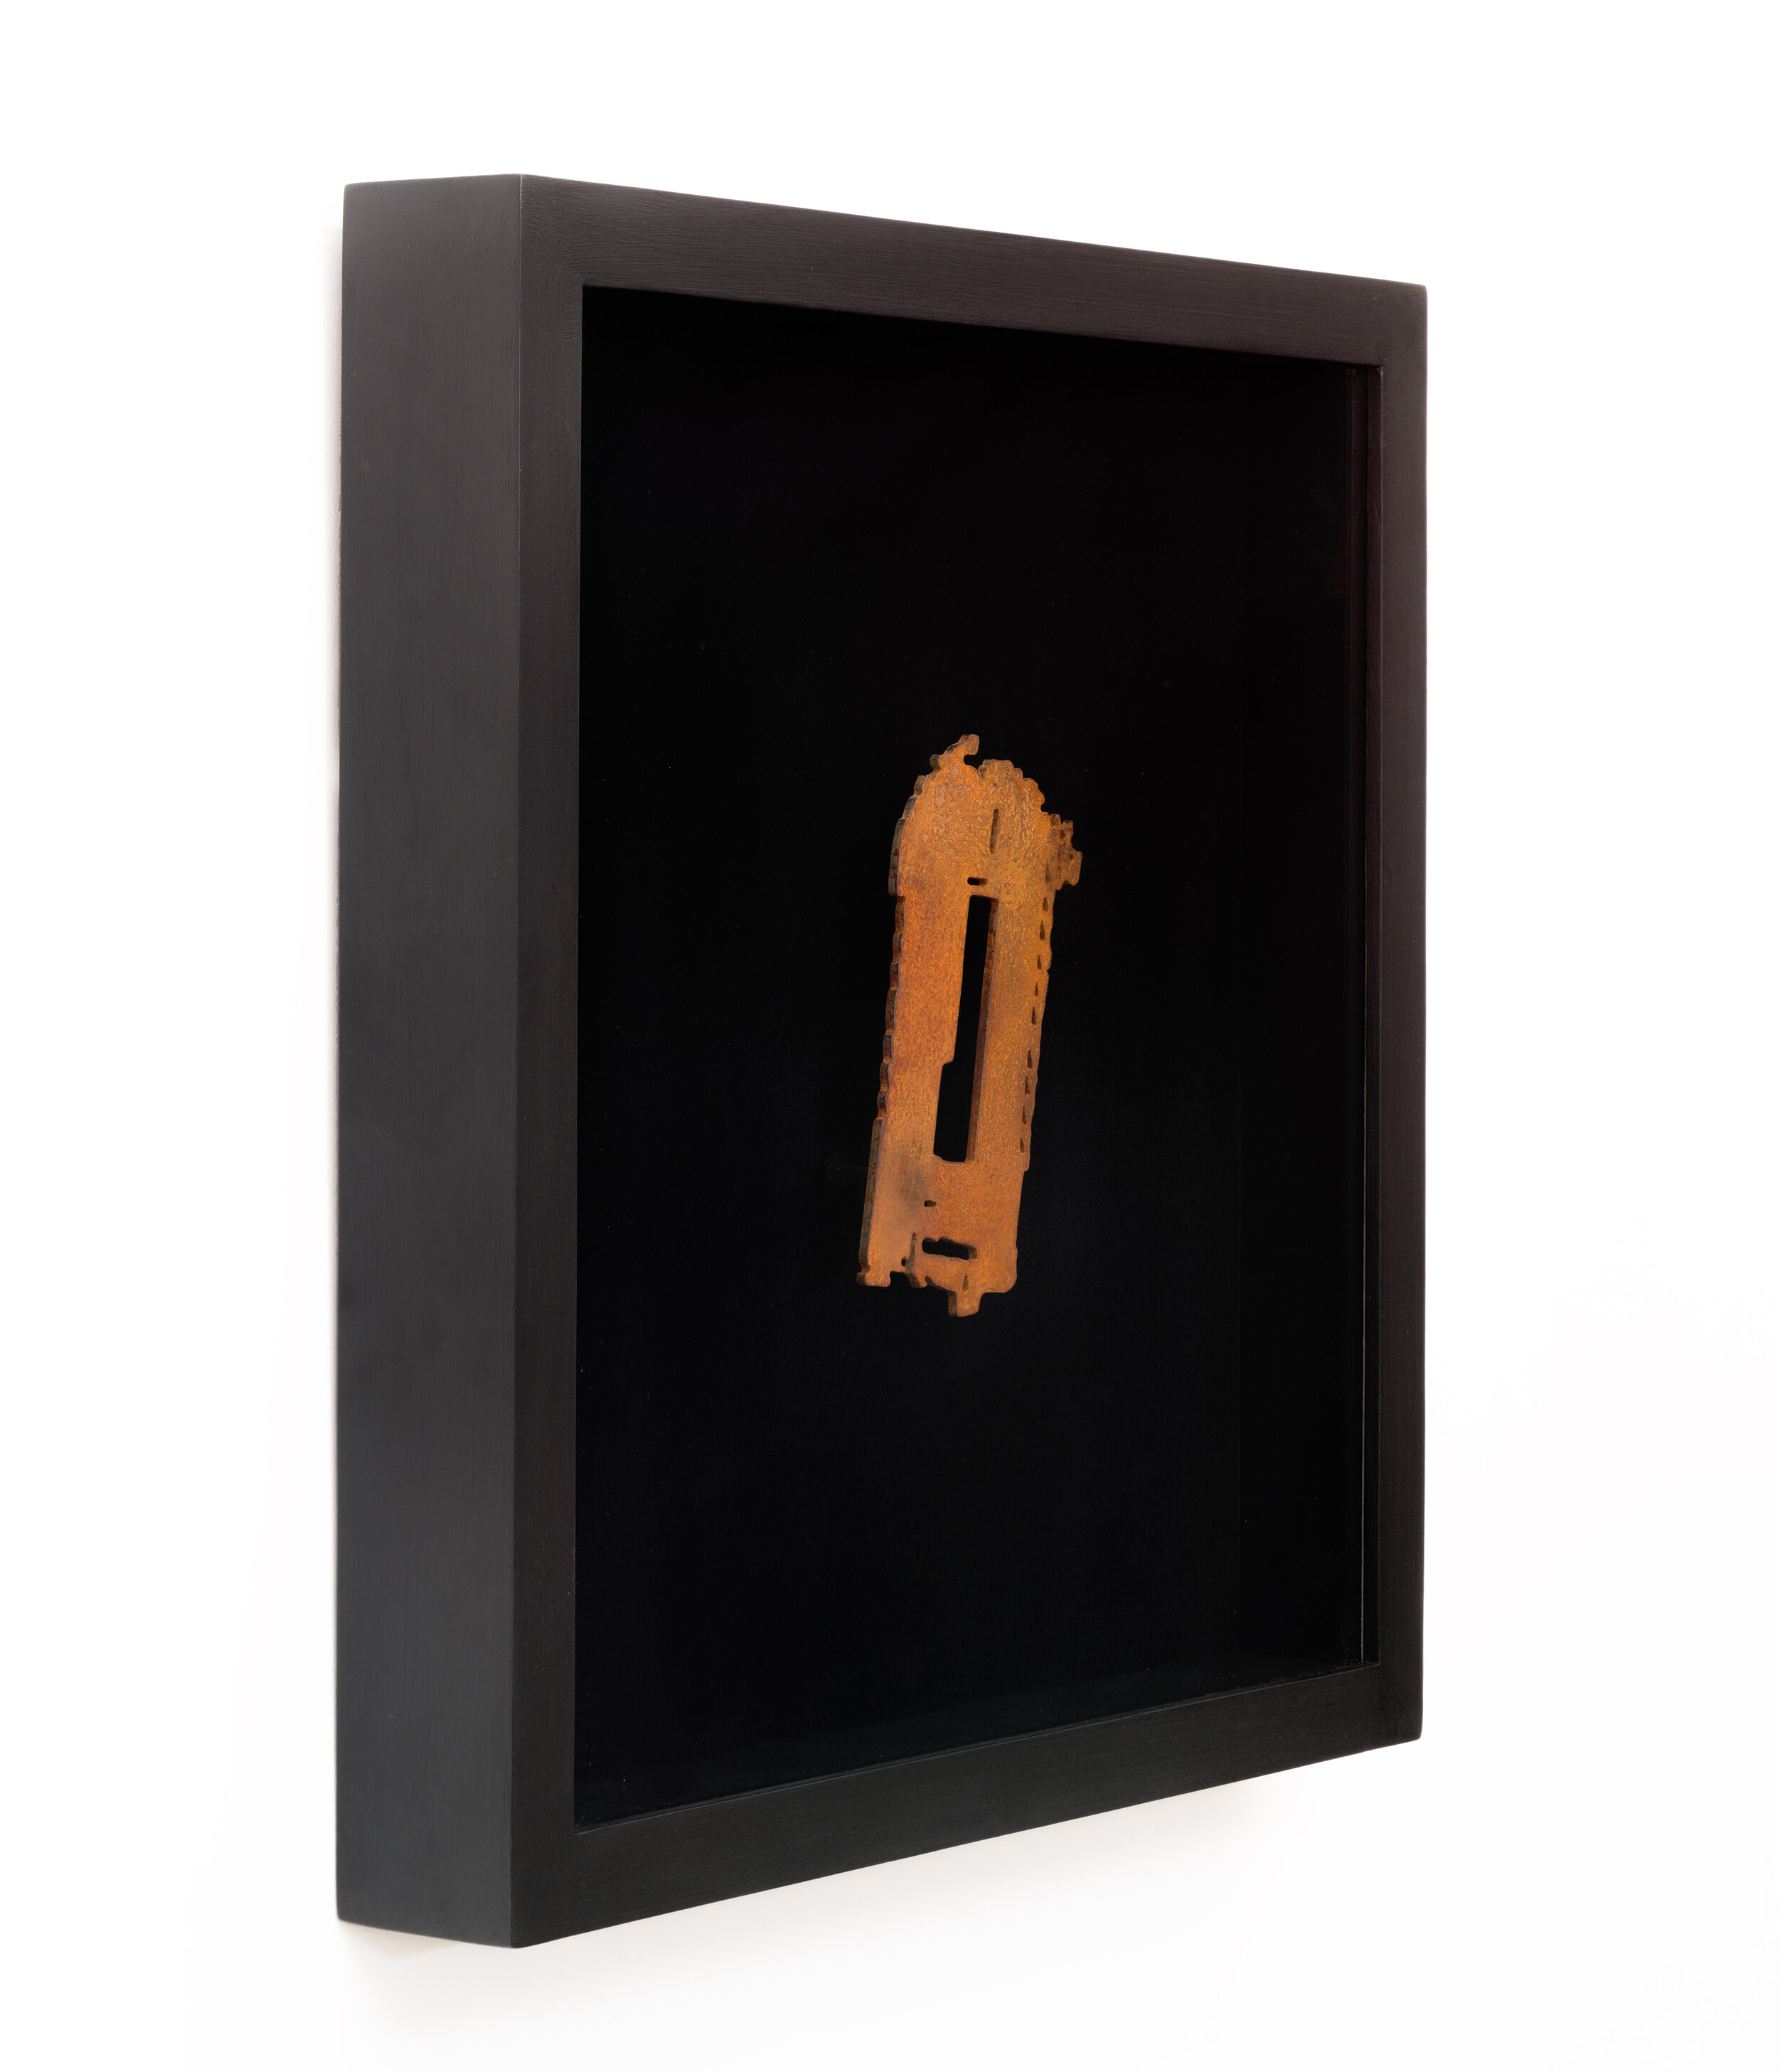  Untitled ( Shitgoldshit)   Iron, shadow box frame, acrylic 60 X 60 X 8 cm (بدون عنوان (گهطلاگه   *the sculpture formally replicates the plan view of the massive gold trading market’s building located across the street from the gallery.  